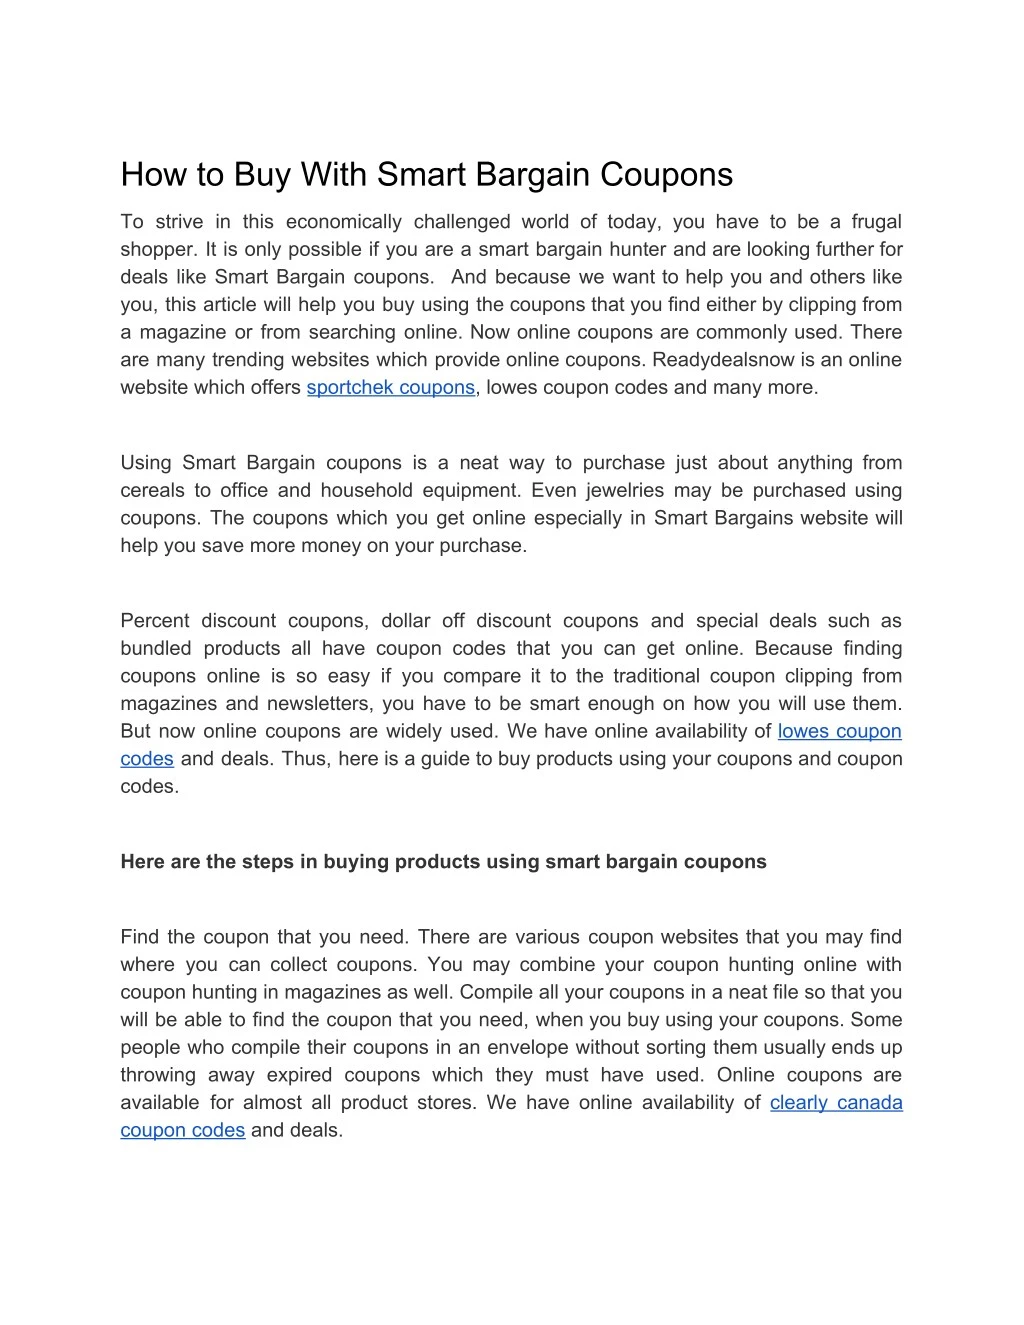 how to buy with smart bargain coupons